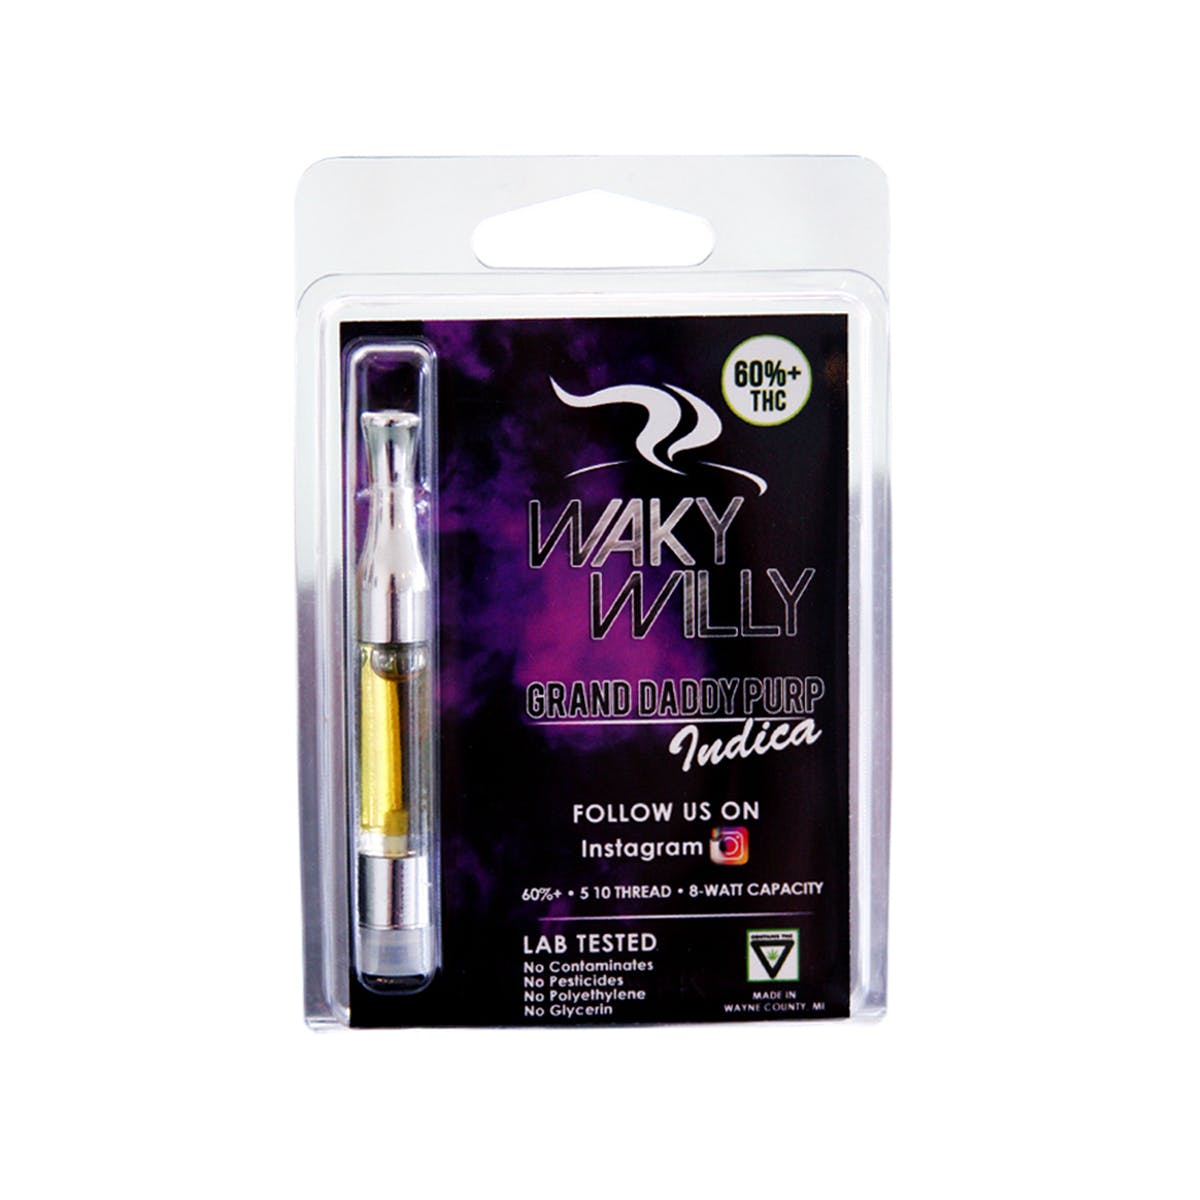 concentrate-grand-daddy-purp-waky-willy-cartridge